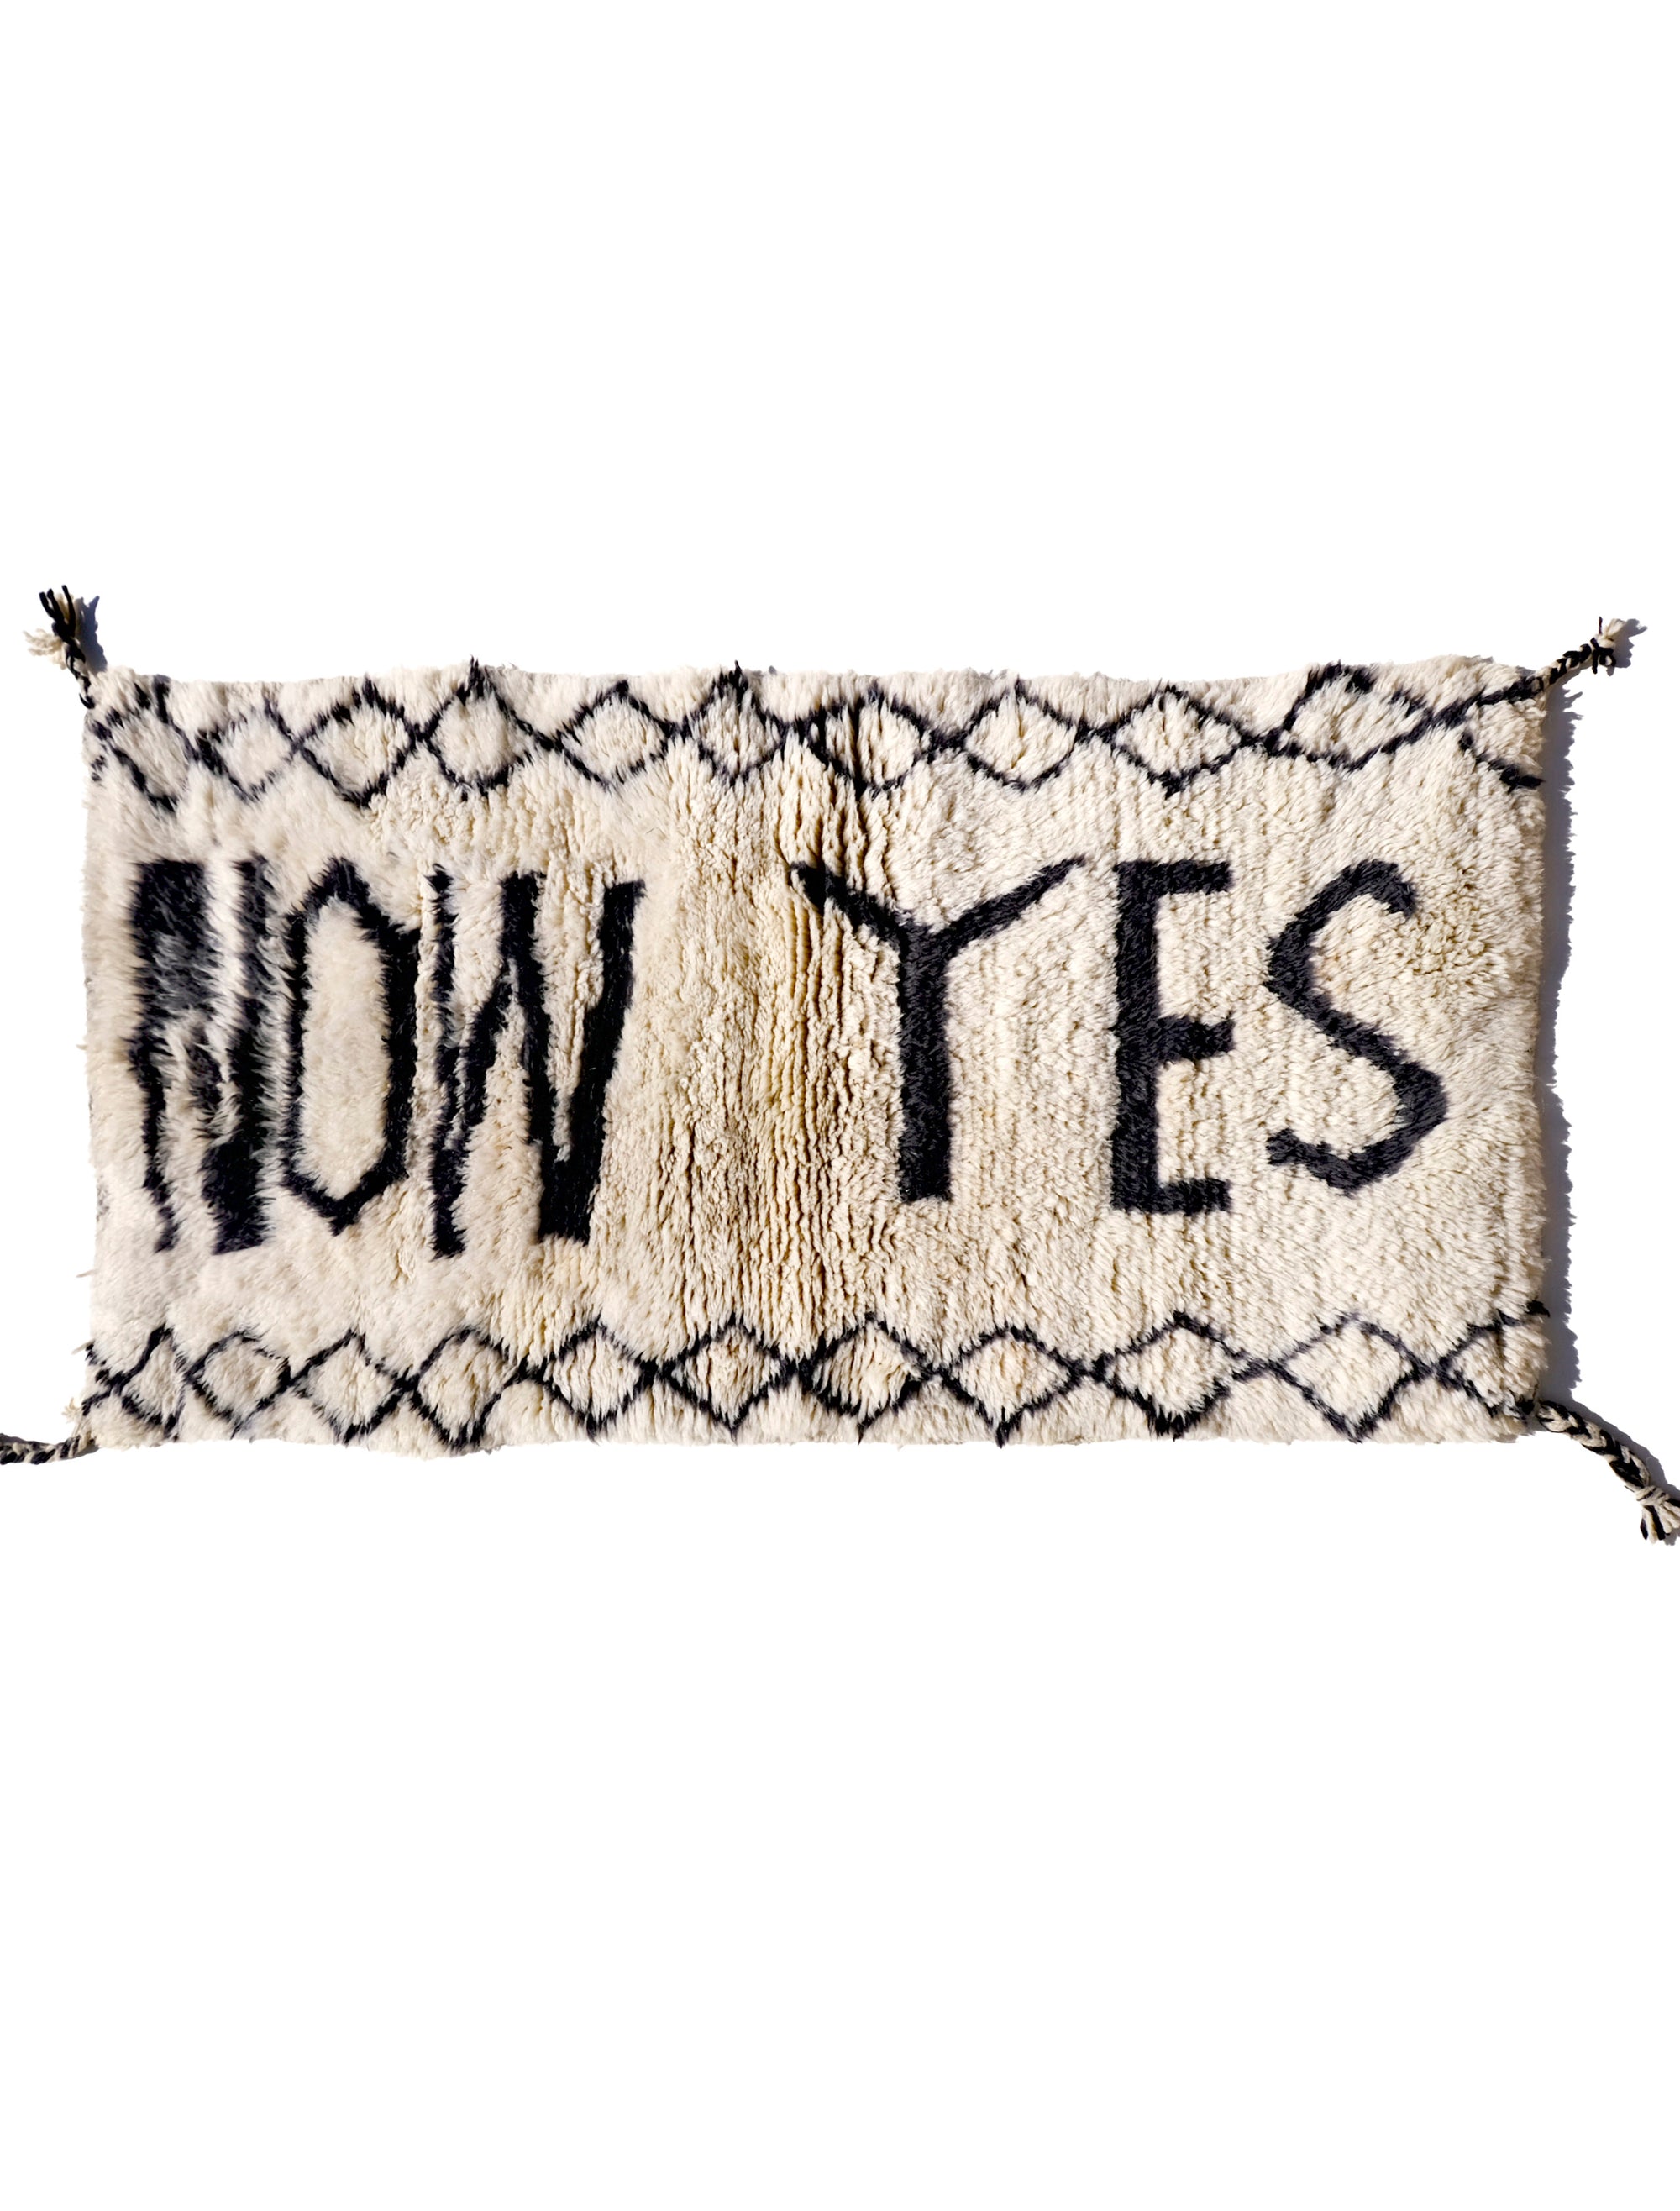 Infuse your space with positivity using the "Ivory In the Moment Rug." Handmade in the Atlas Mountains, its soft ivory base showcases the empowering phrase "NOW YES" at the center. Modern and Moroccan-inspired with small diamond patterns, this unique rug adds style and positivity to your home.